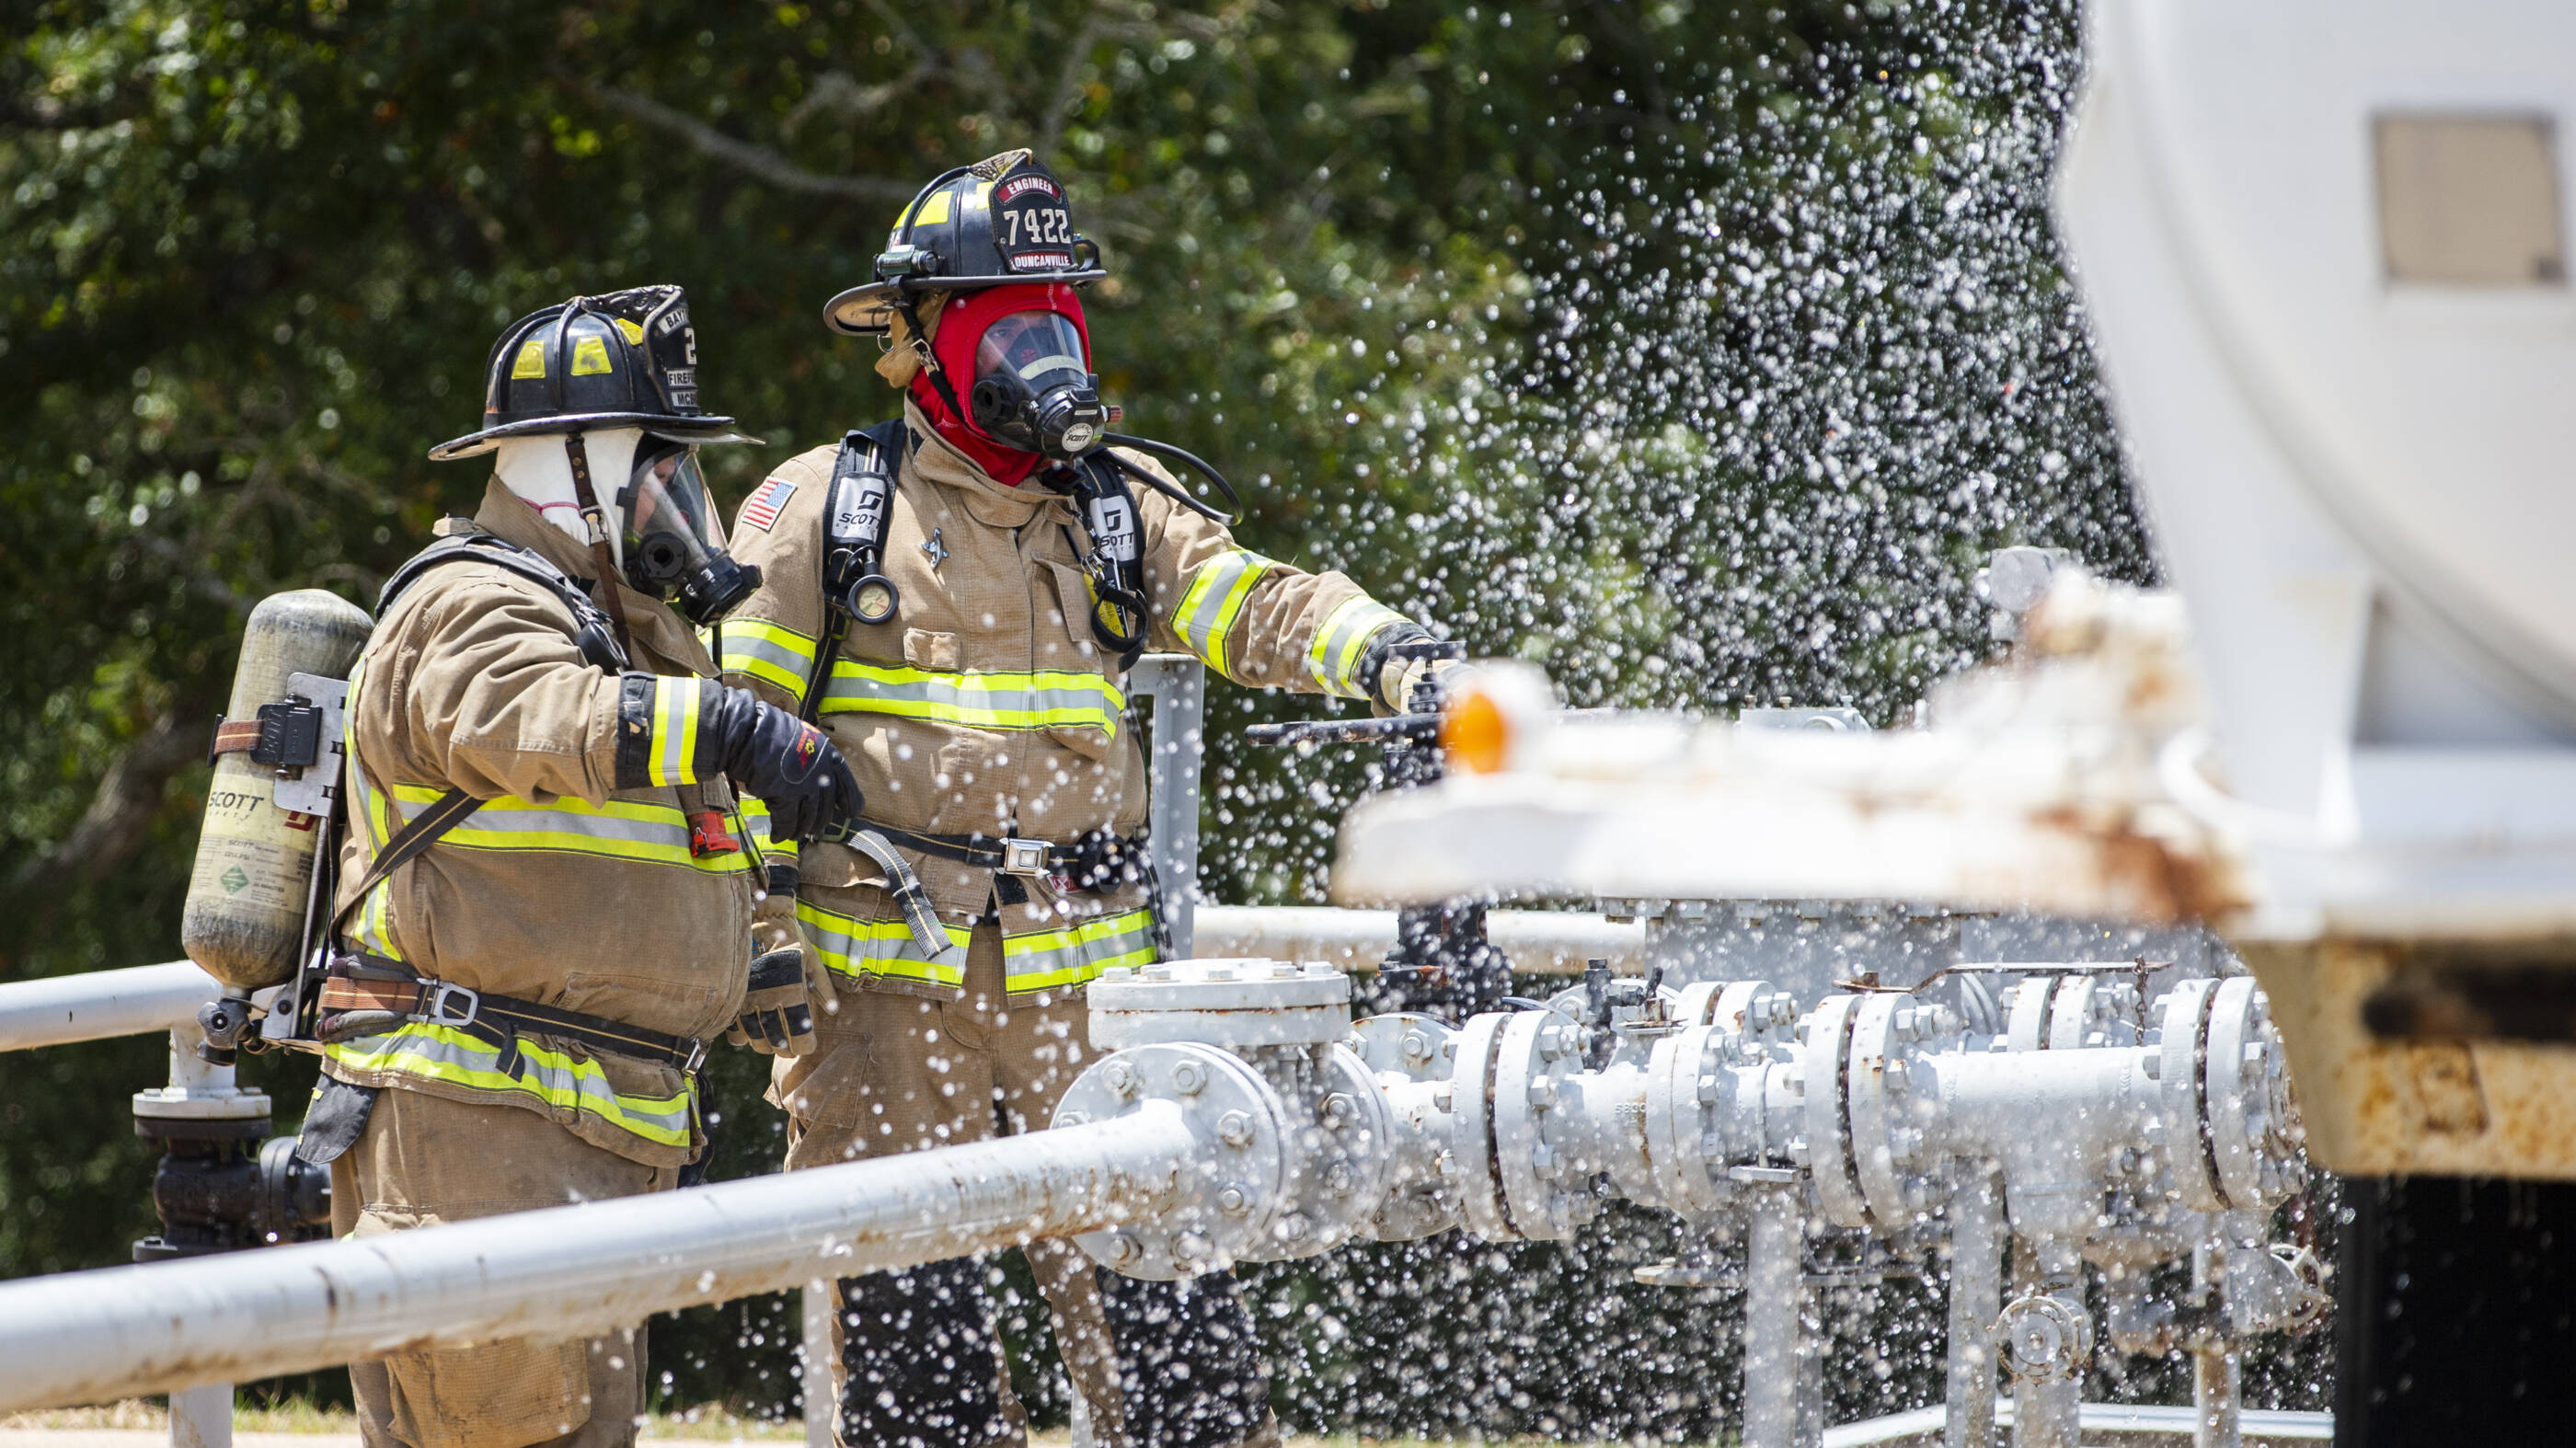 ExxonMobil employees regularly attend specialized trainings, often with local firefighters and other first responders, to help ensure preparedness in the case of an emergency.